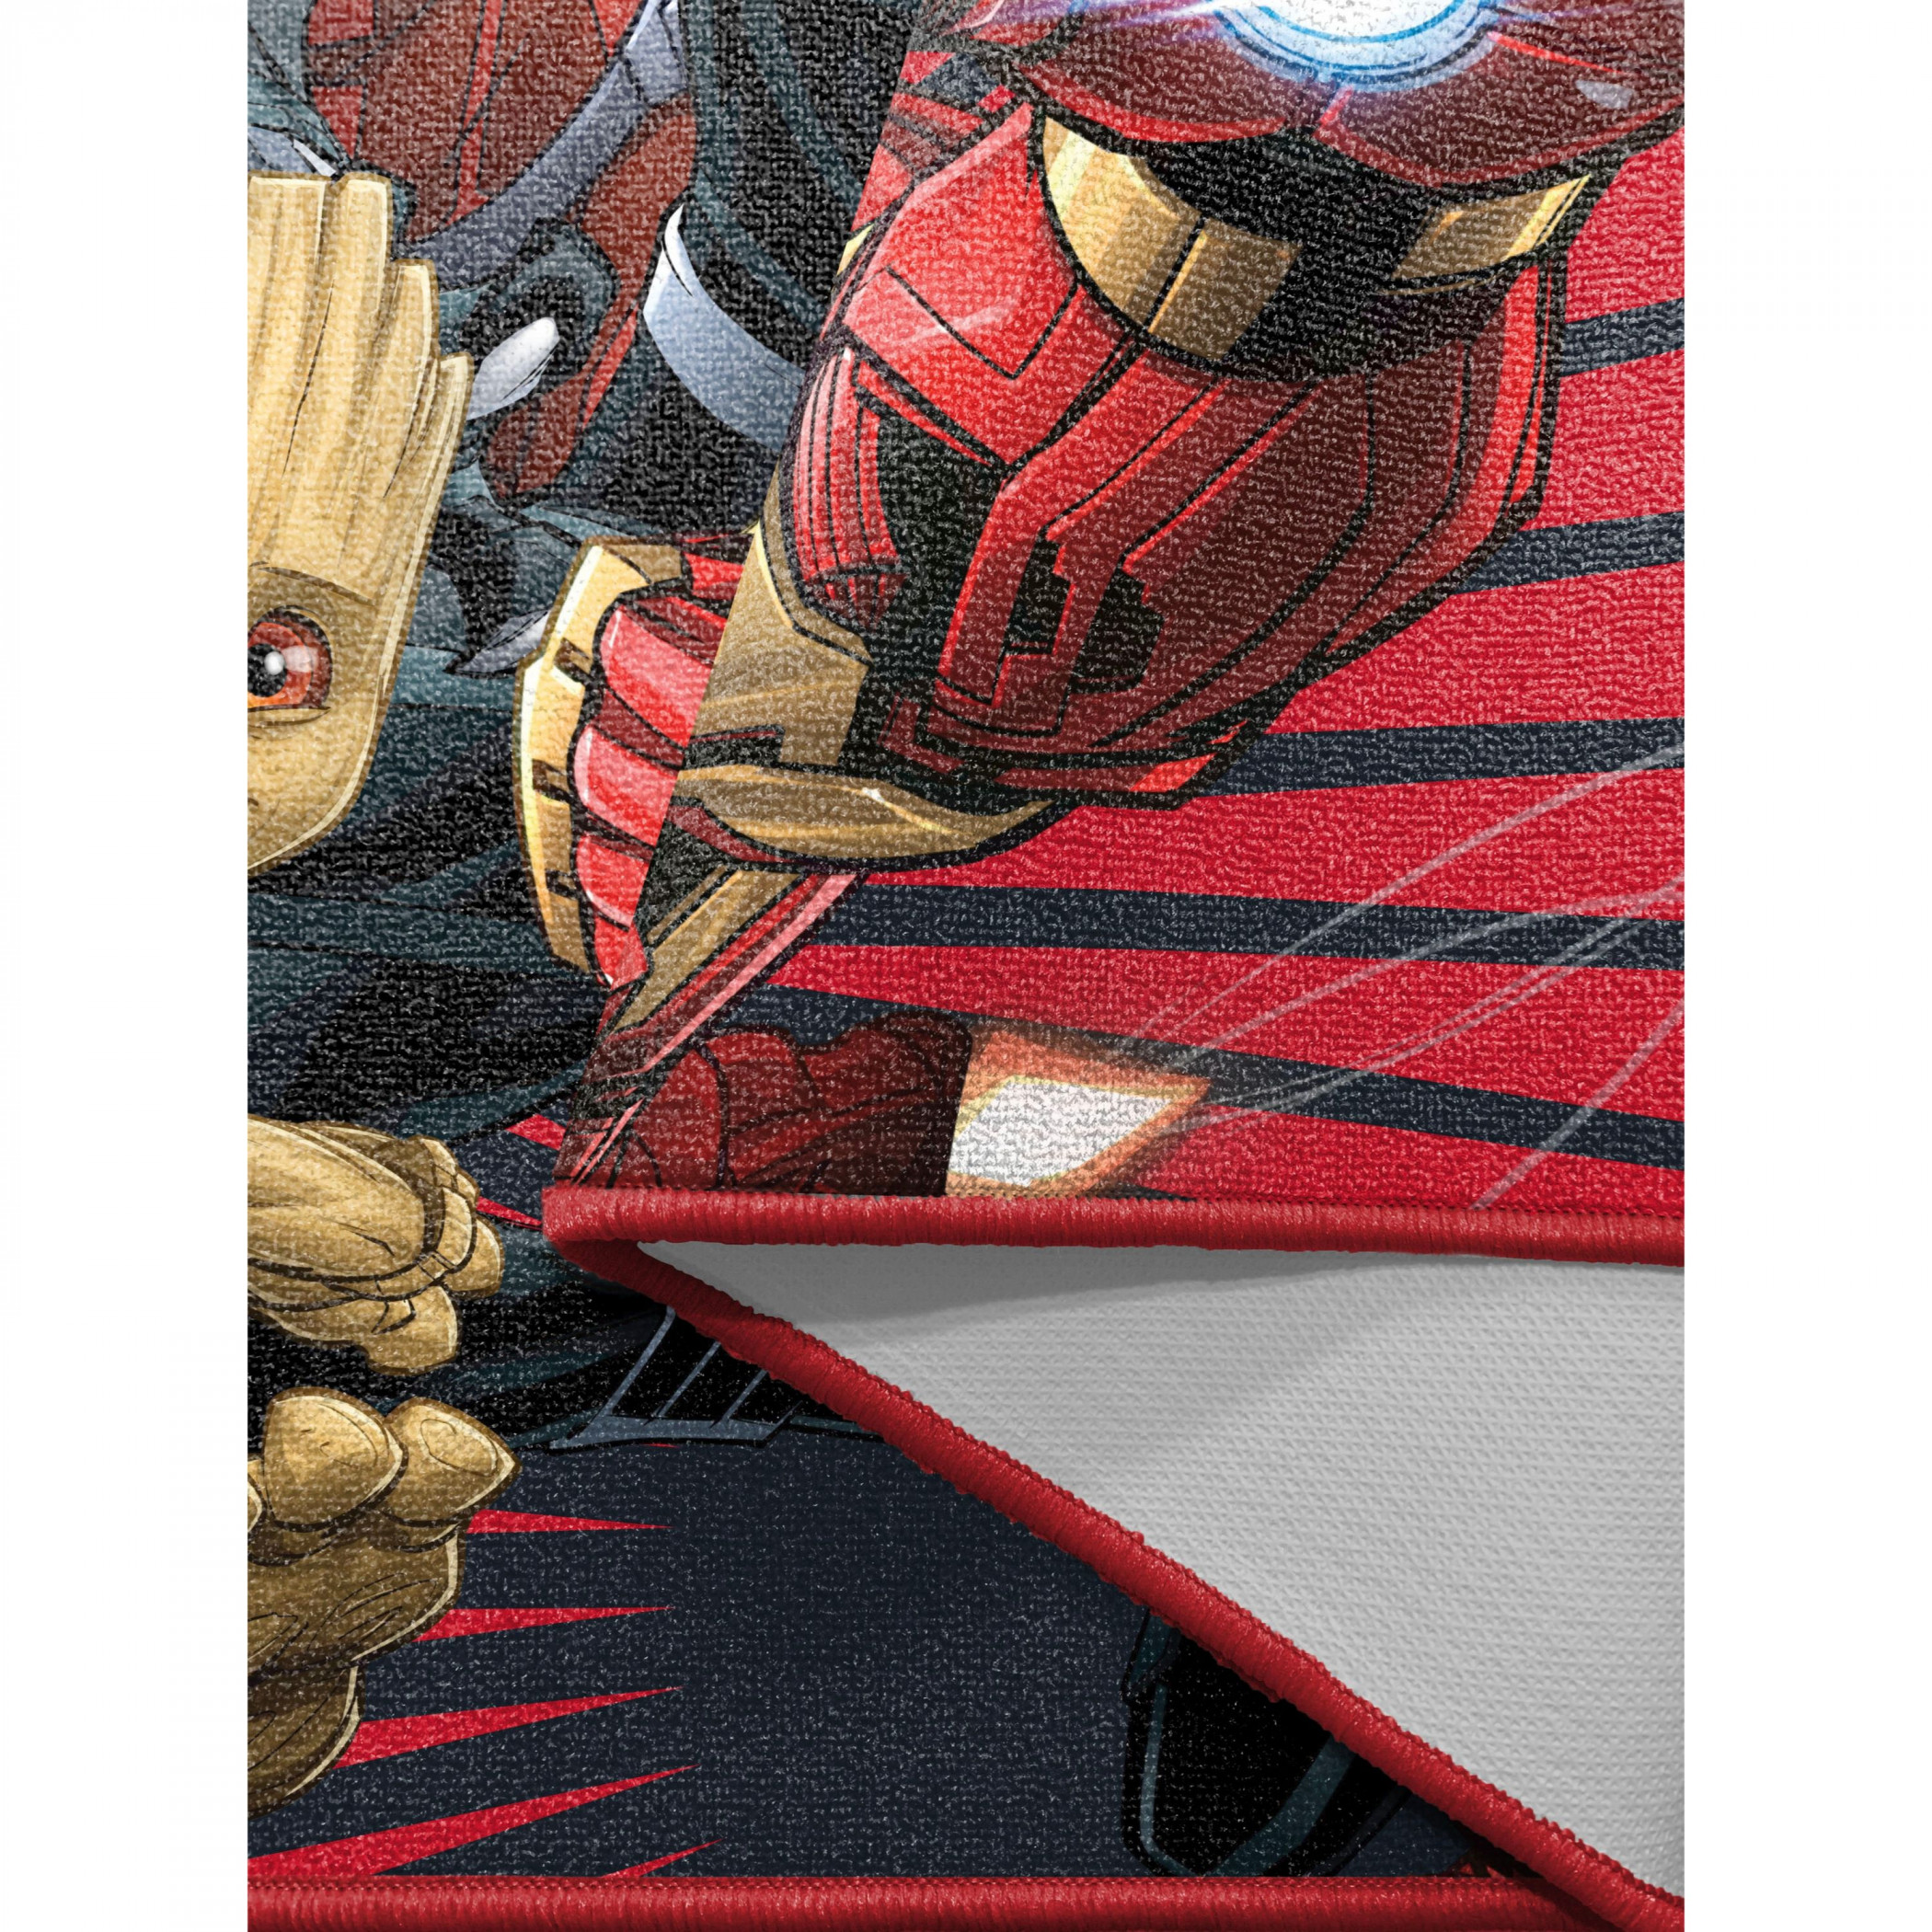 Marvel Heroes Ready for Action 52" x 69"  Rug